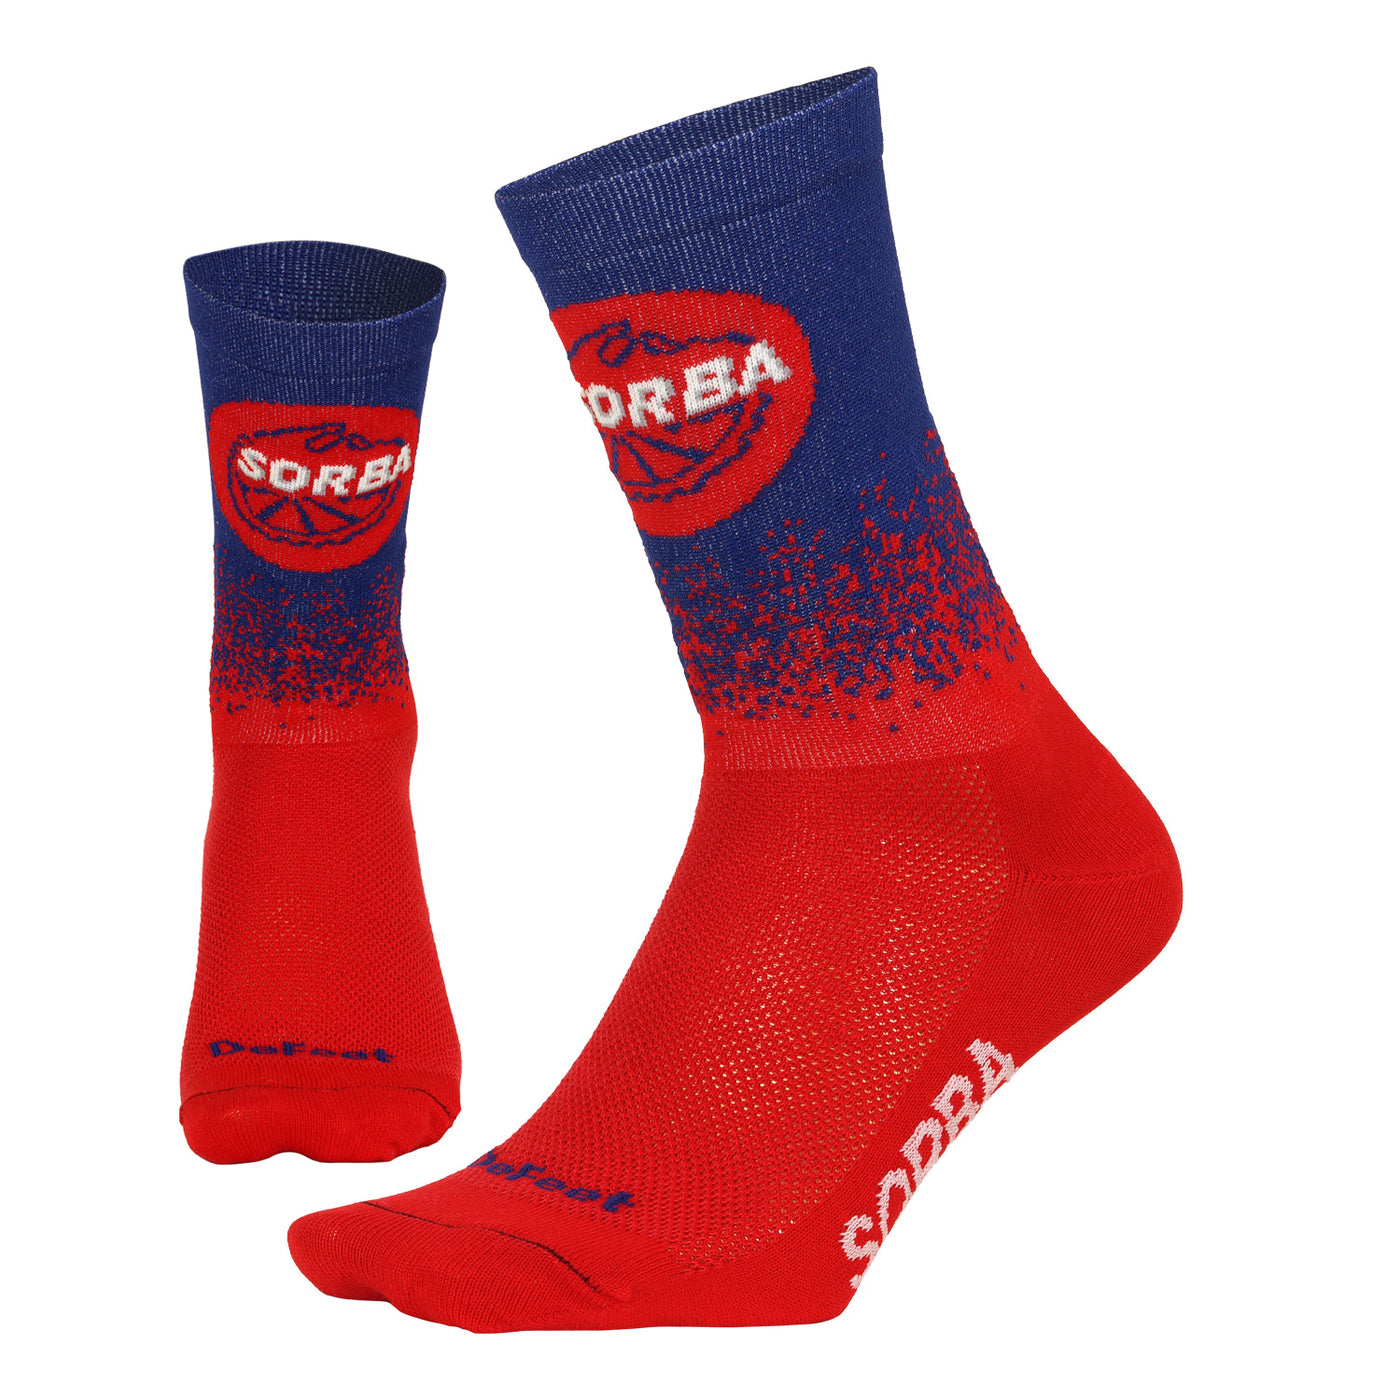 DeFeet Aireator cycling sock in a ombre pattern going from a navy cuff to a red foot, with the SORBA logo on the front of the cuff